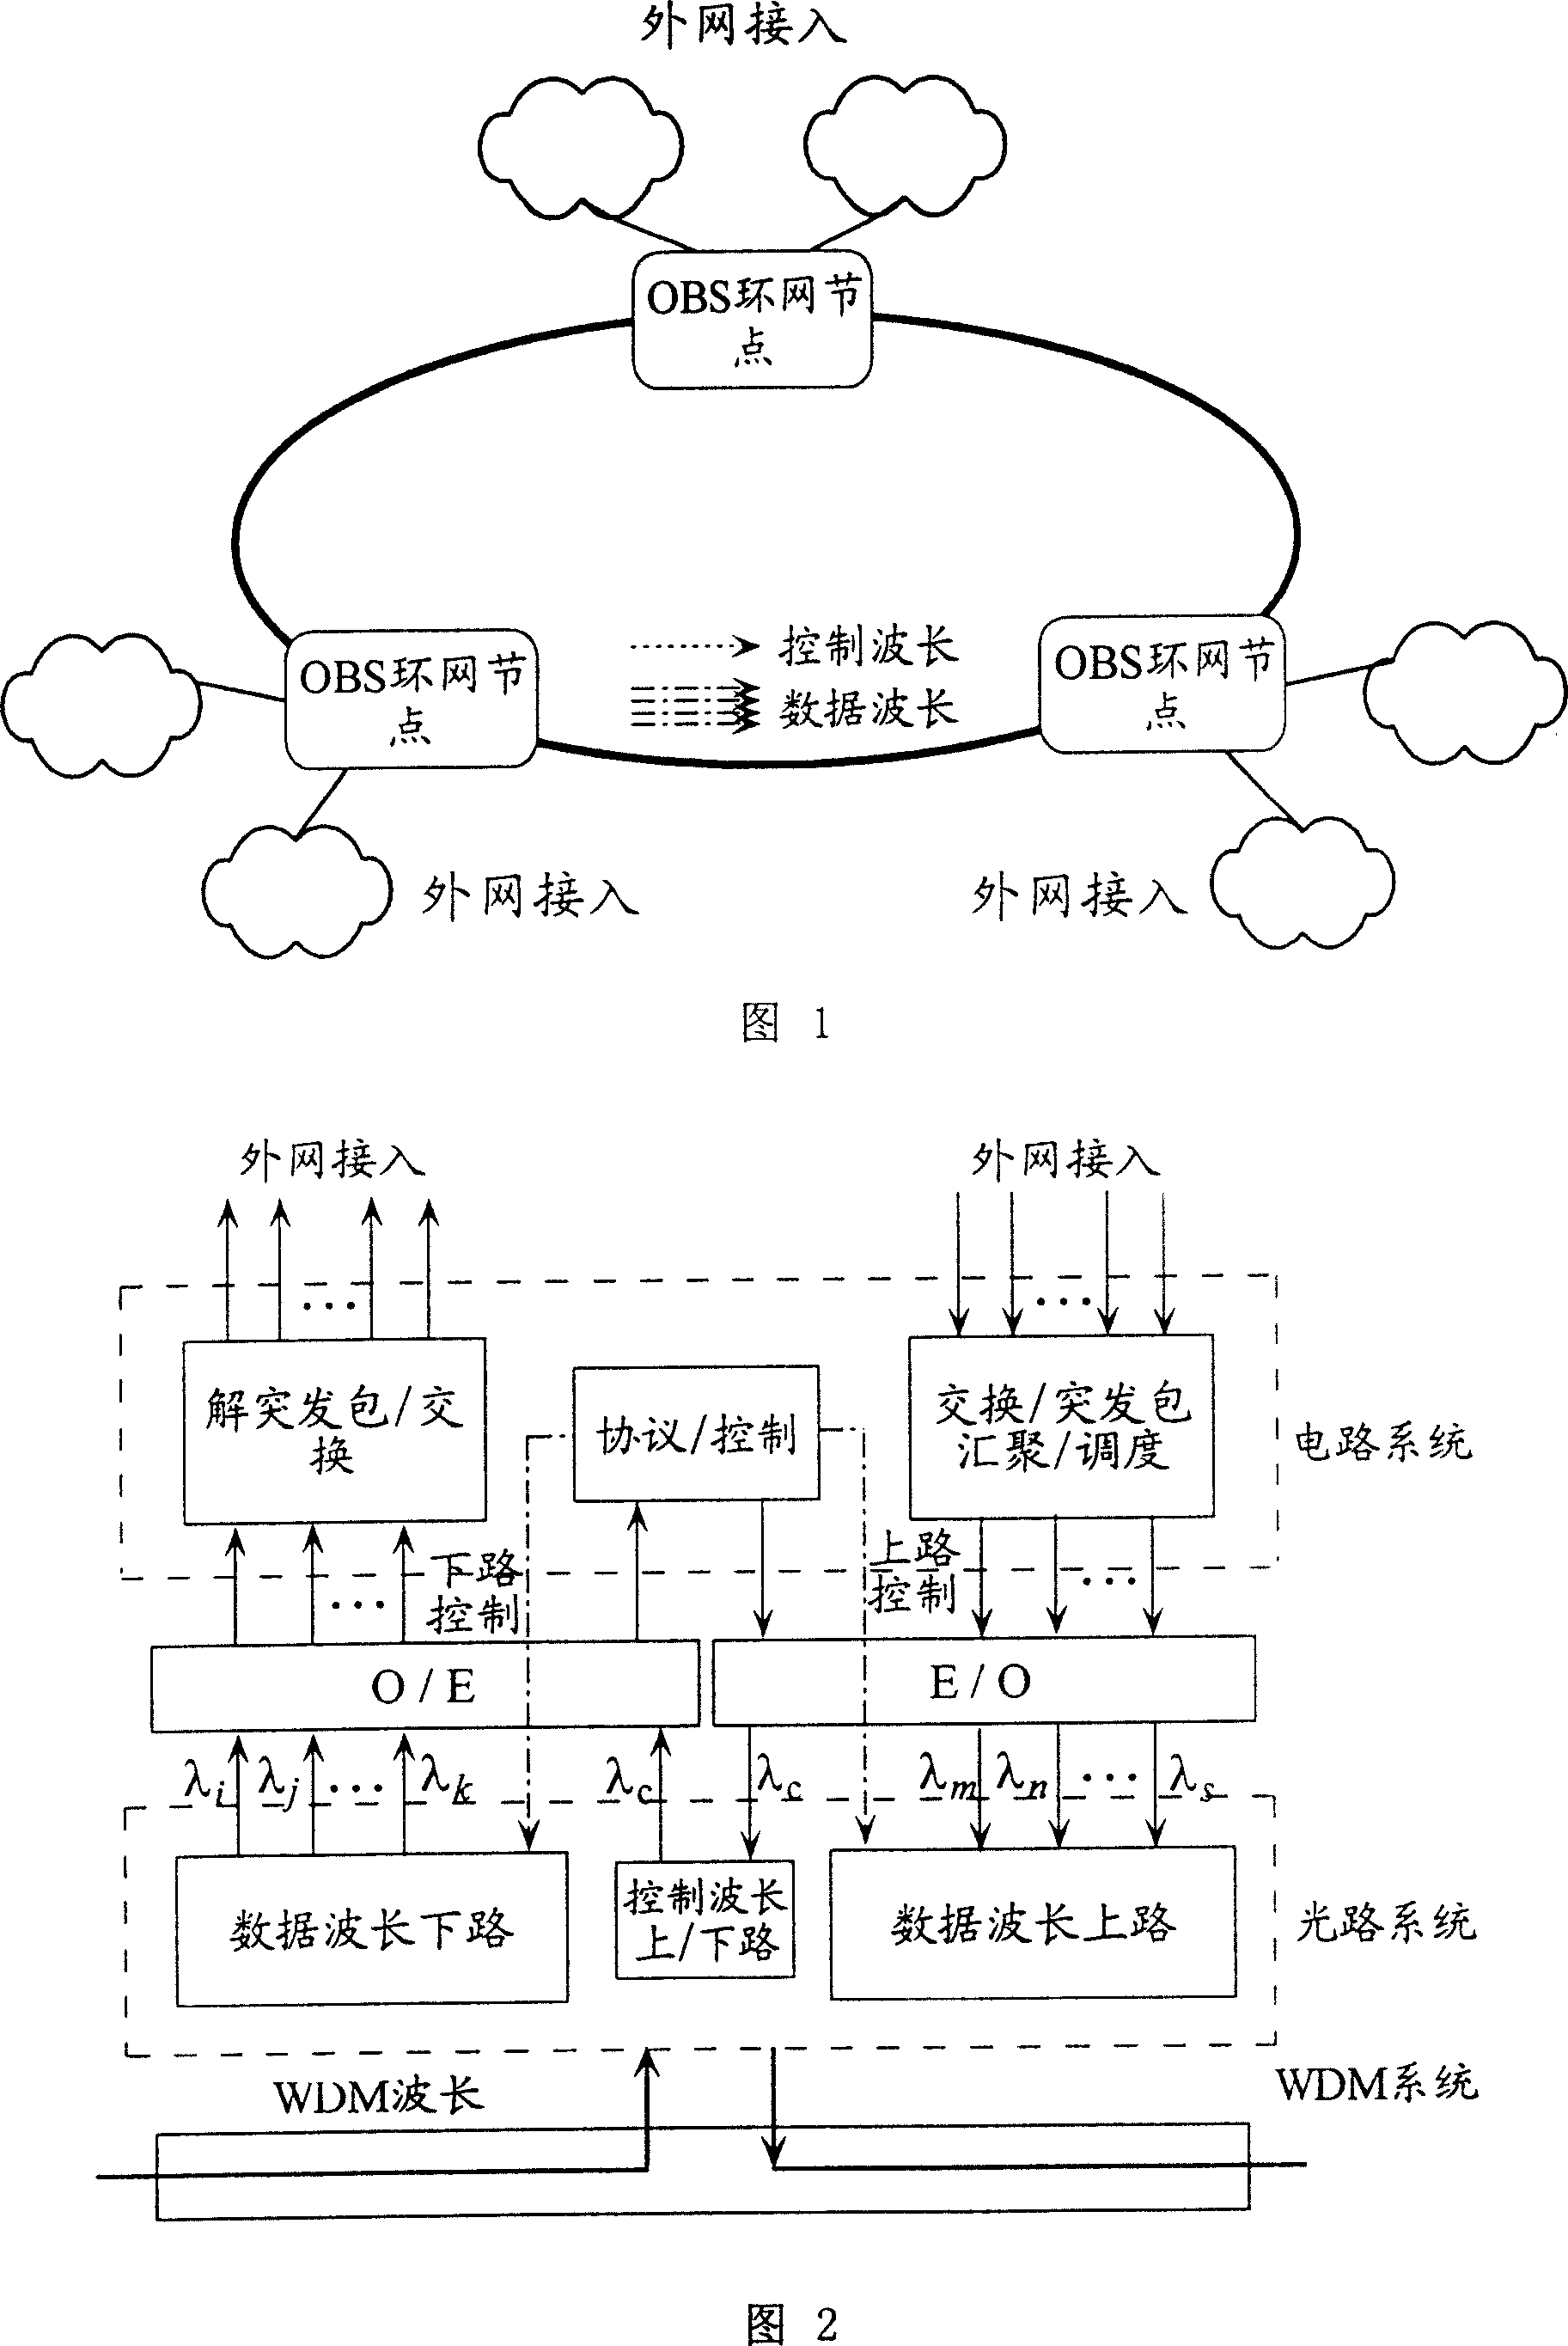 Optical path structure of bust ring network node based on fixed transmission tunable reception